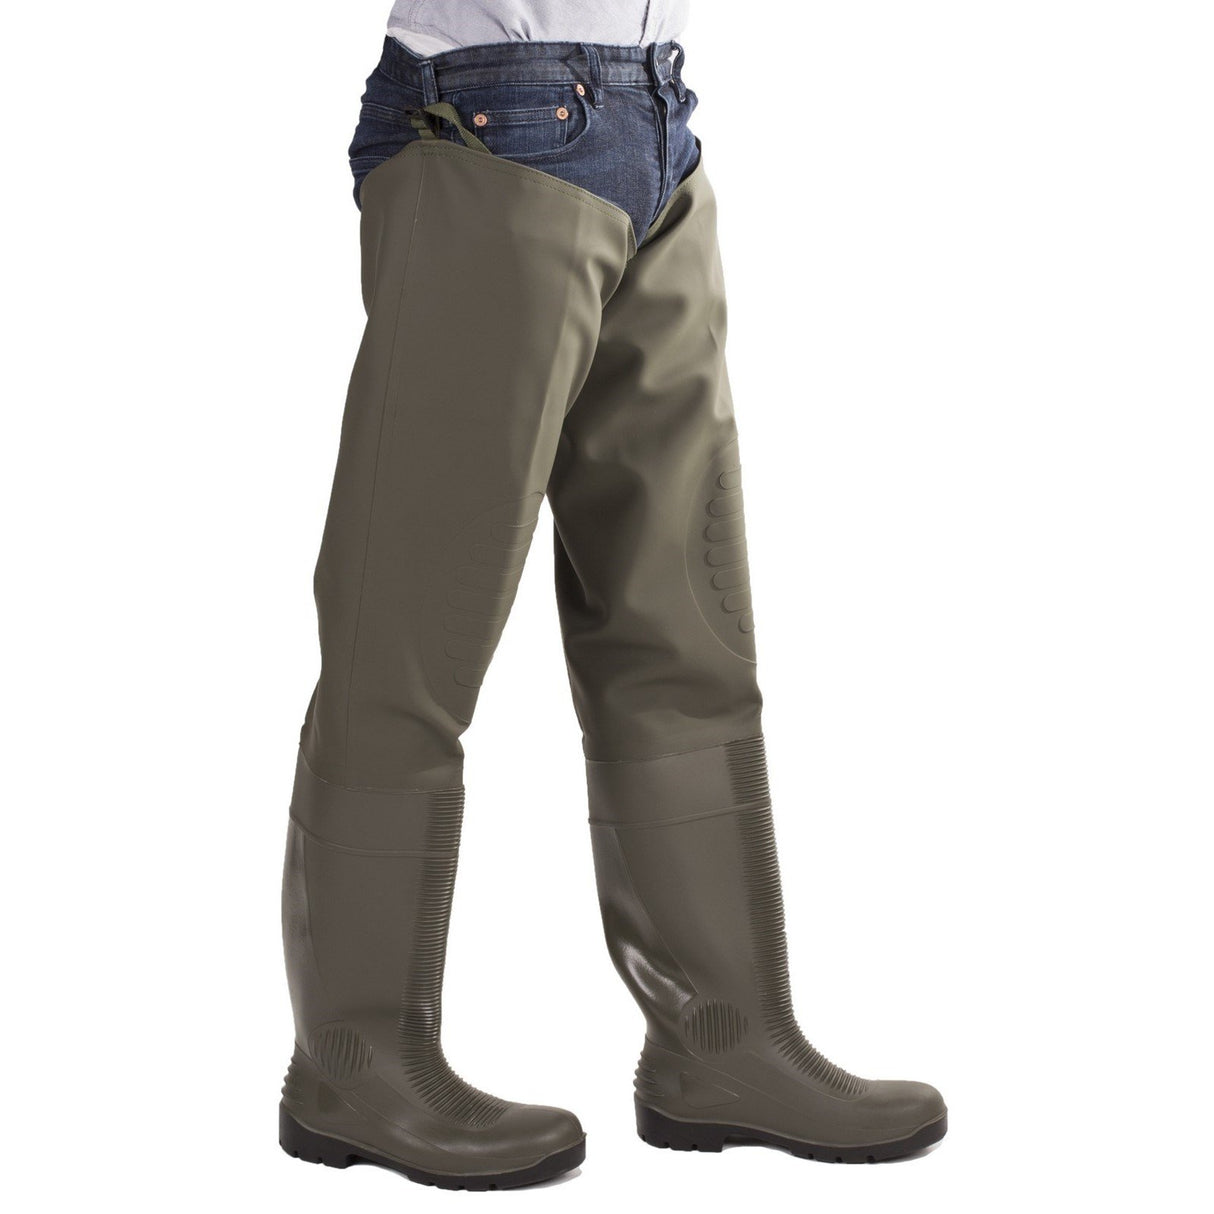 Amblers Safety Forth Thigh Safety Waders